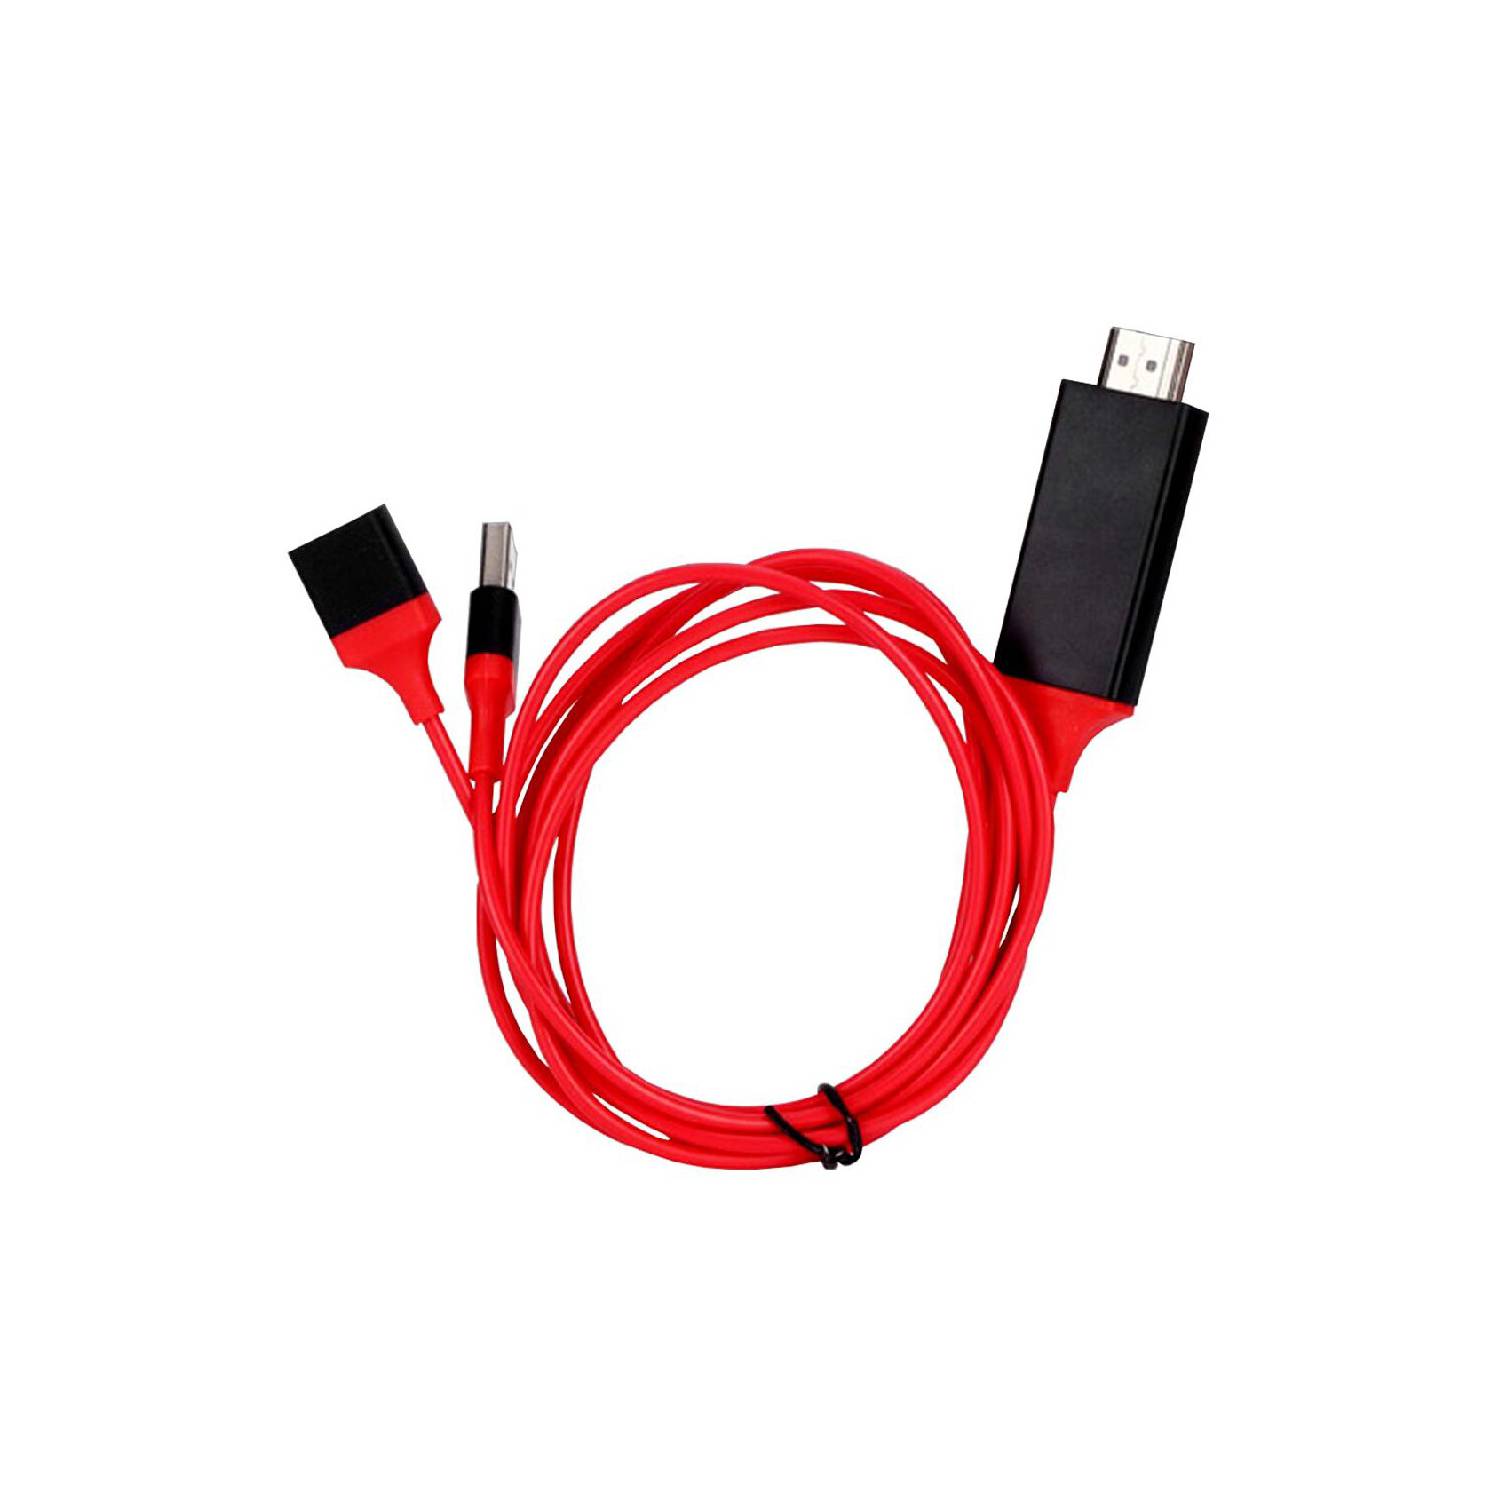 CABLE OTG PARA CELULARES ANDROID USB-455 